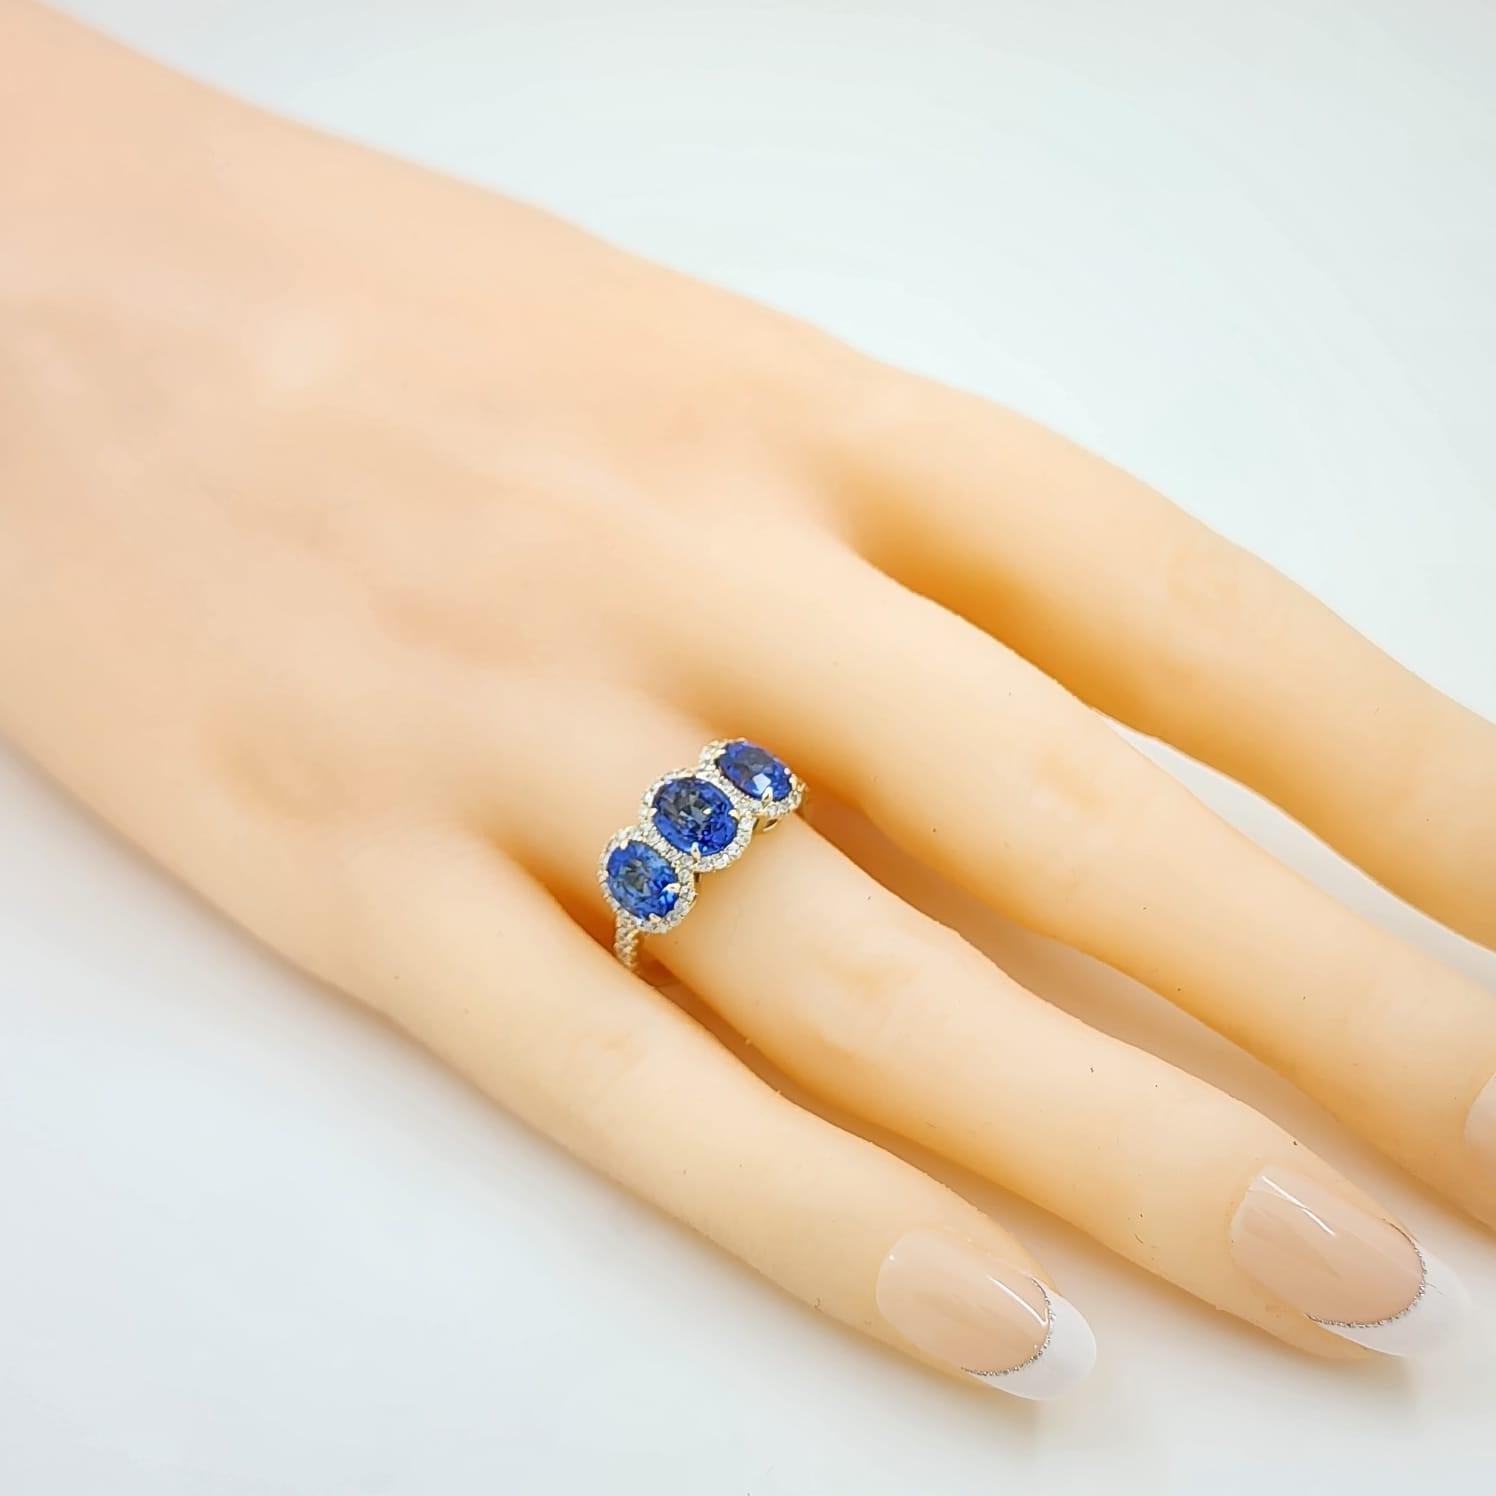 3.81 Carat Blue Sapphire and Diamond Ring in 14 Karat Yellow Gold For Sale 1